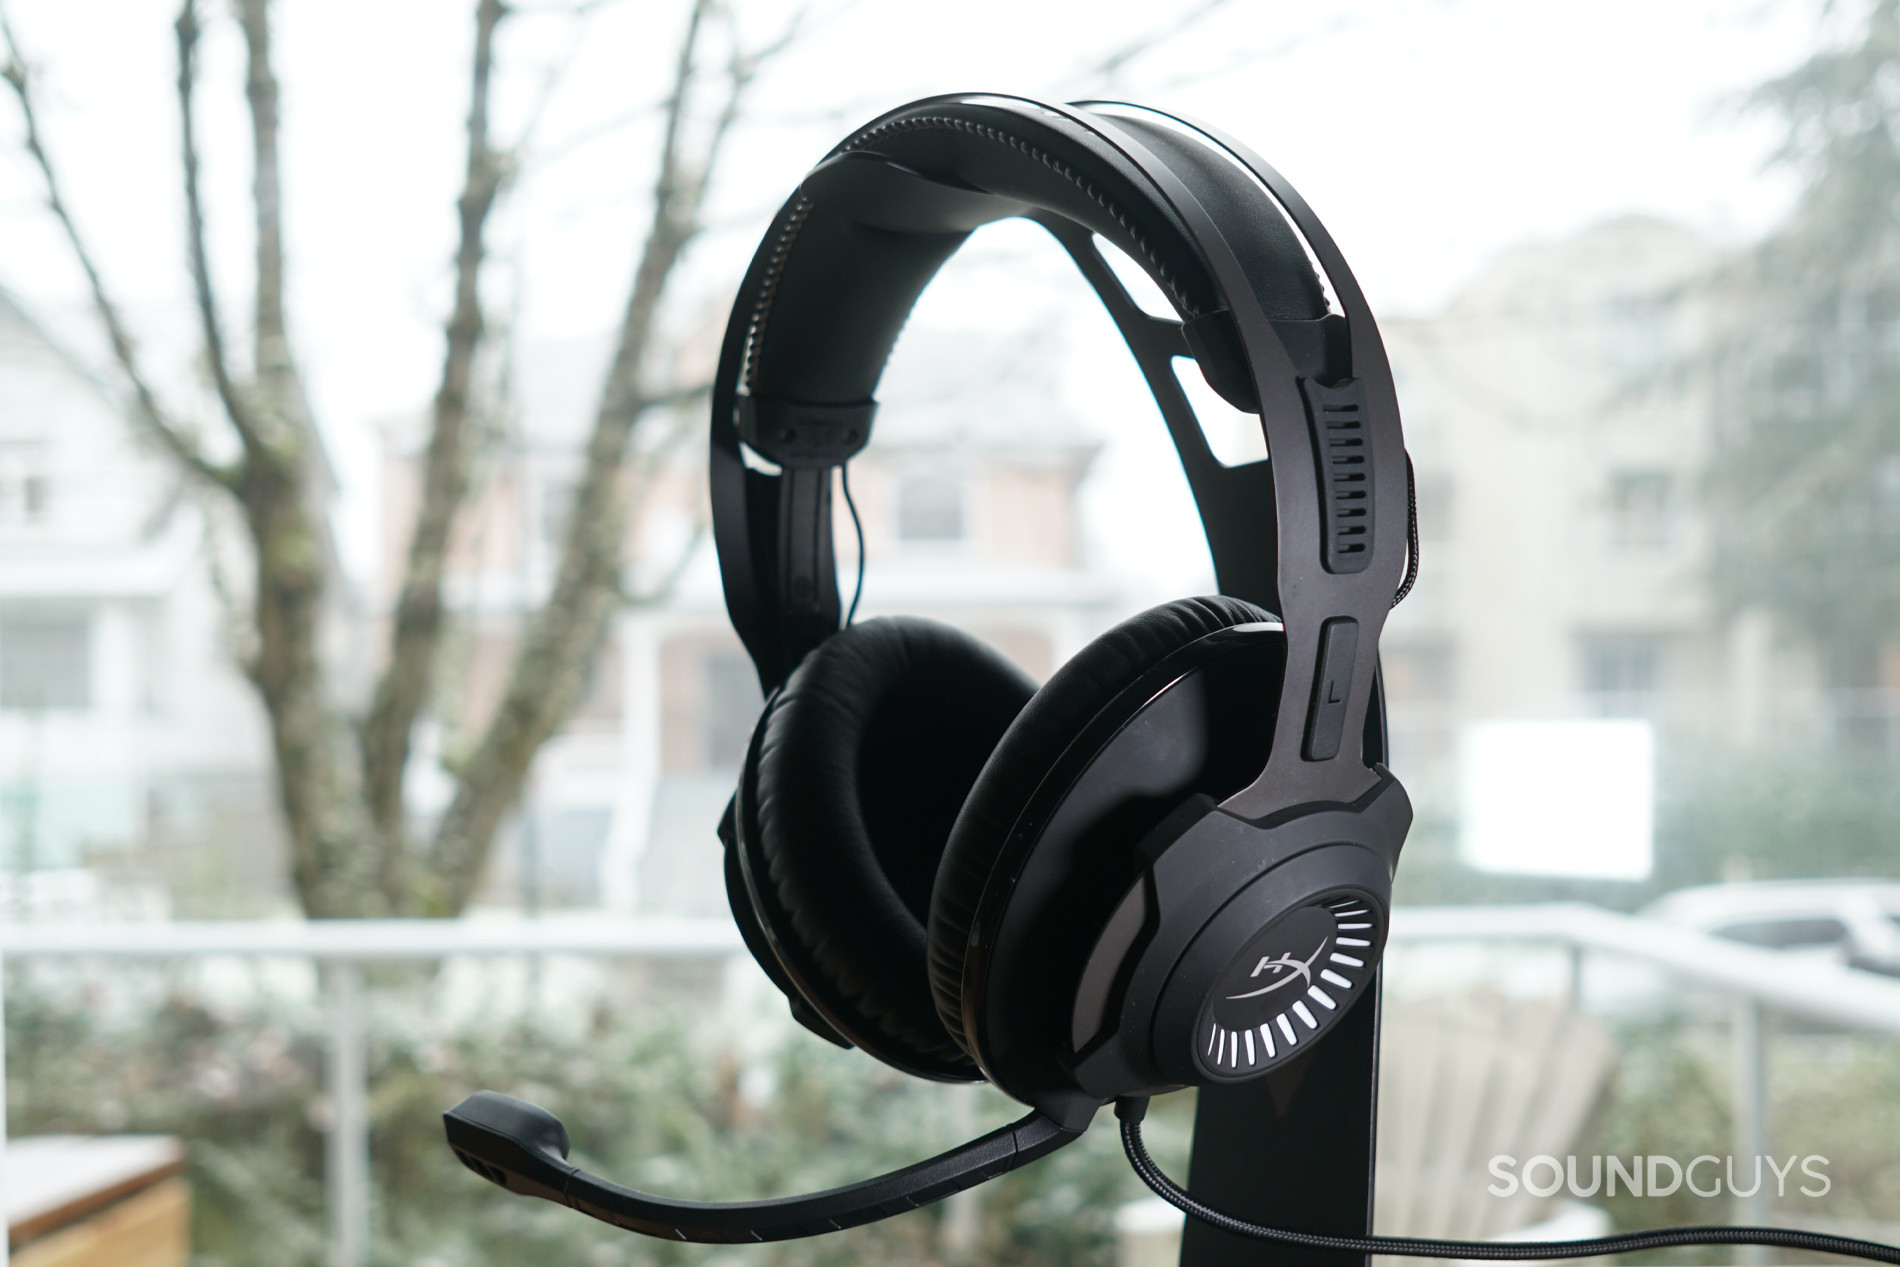 The HyperX Cloud Revolver + 7.1 sits on a stand by a window with snow falling lightly in the background.